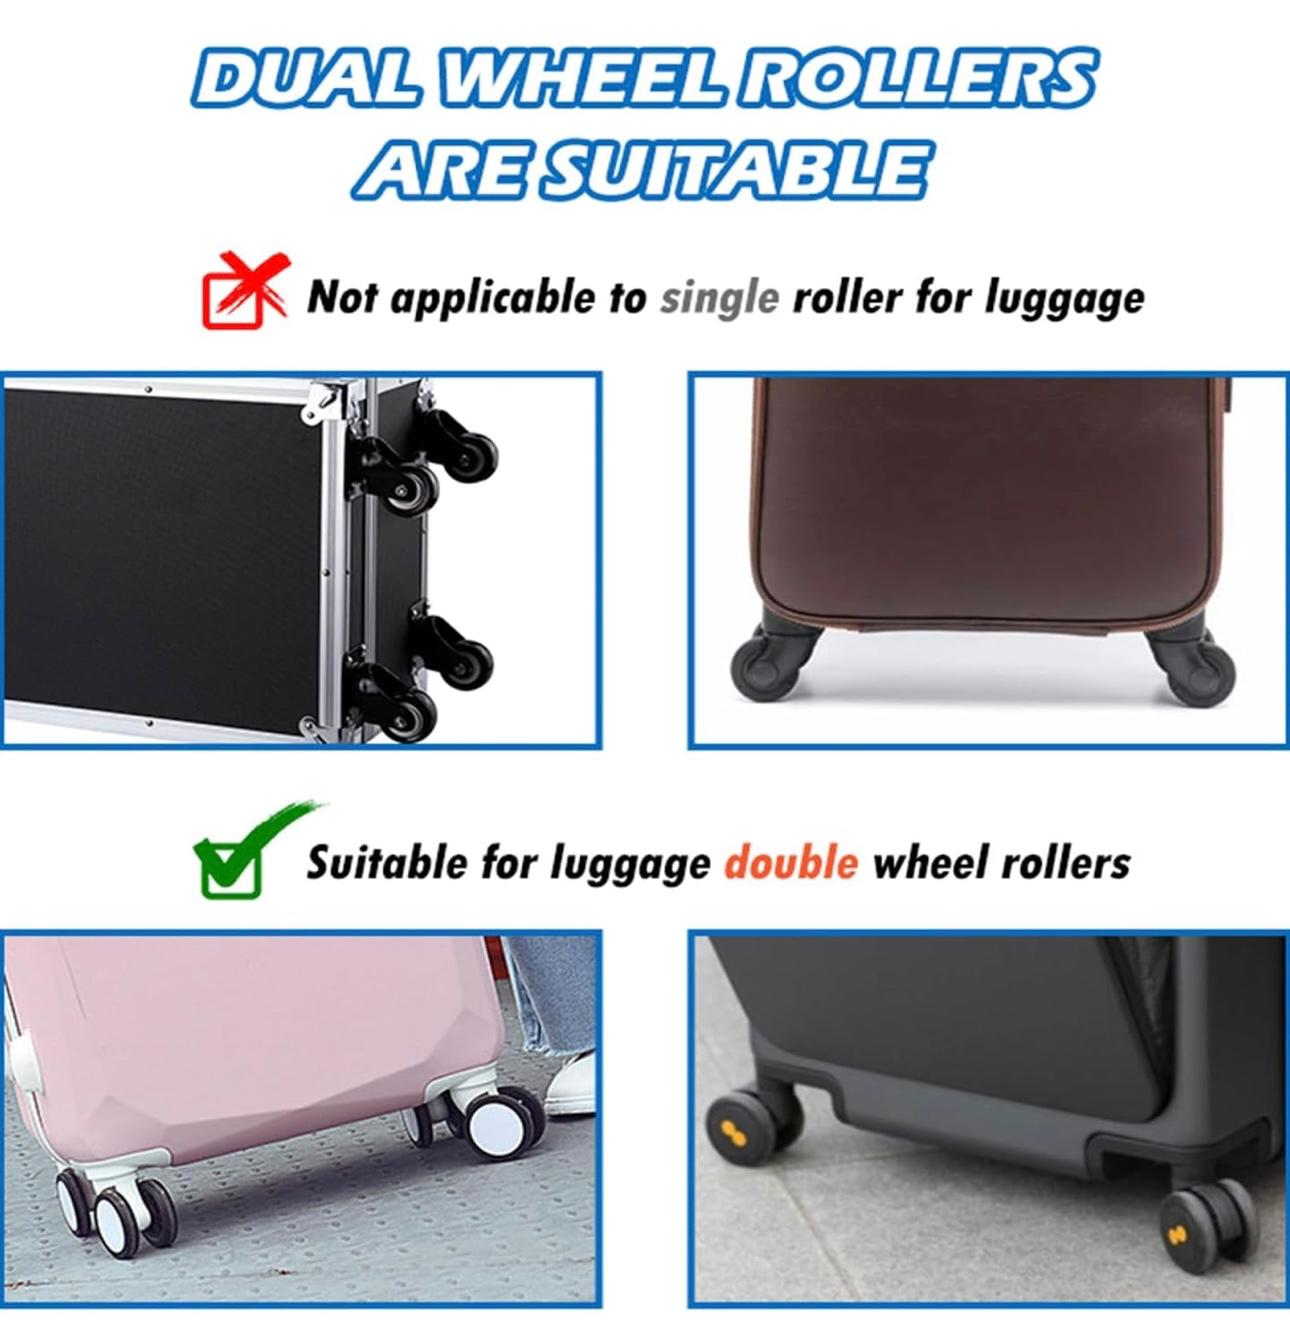 8 PCS Silicone Wheel Protector Covers for 8-Spinner Wheel, Wheel covers for Rolling Suitcases, Office Chairs